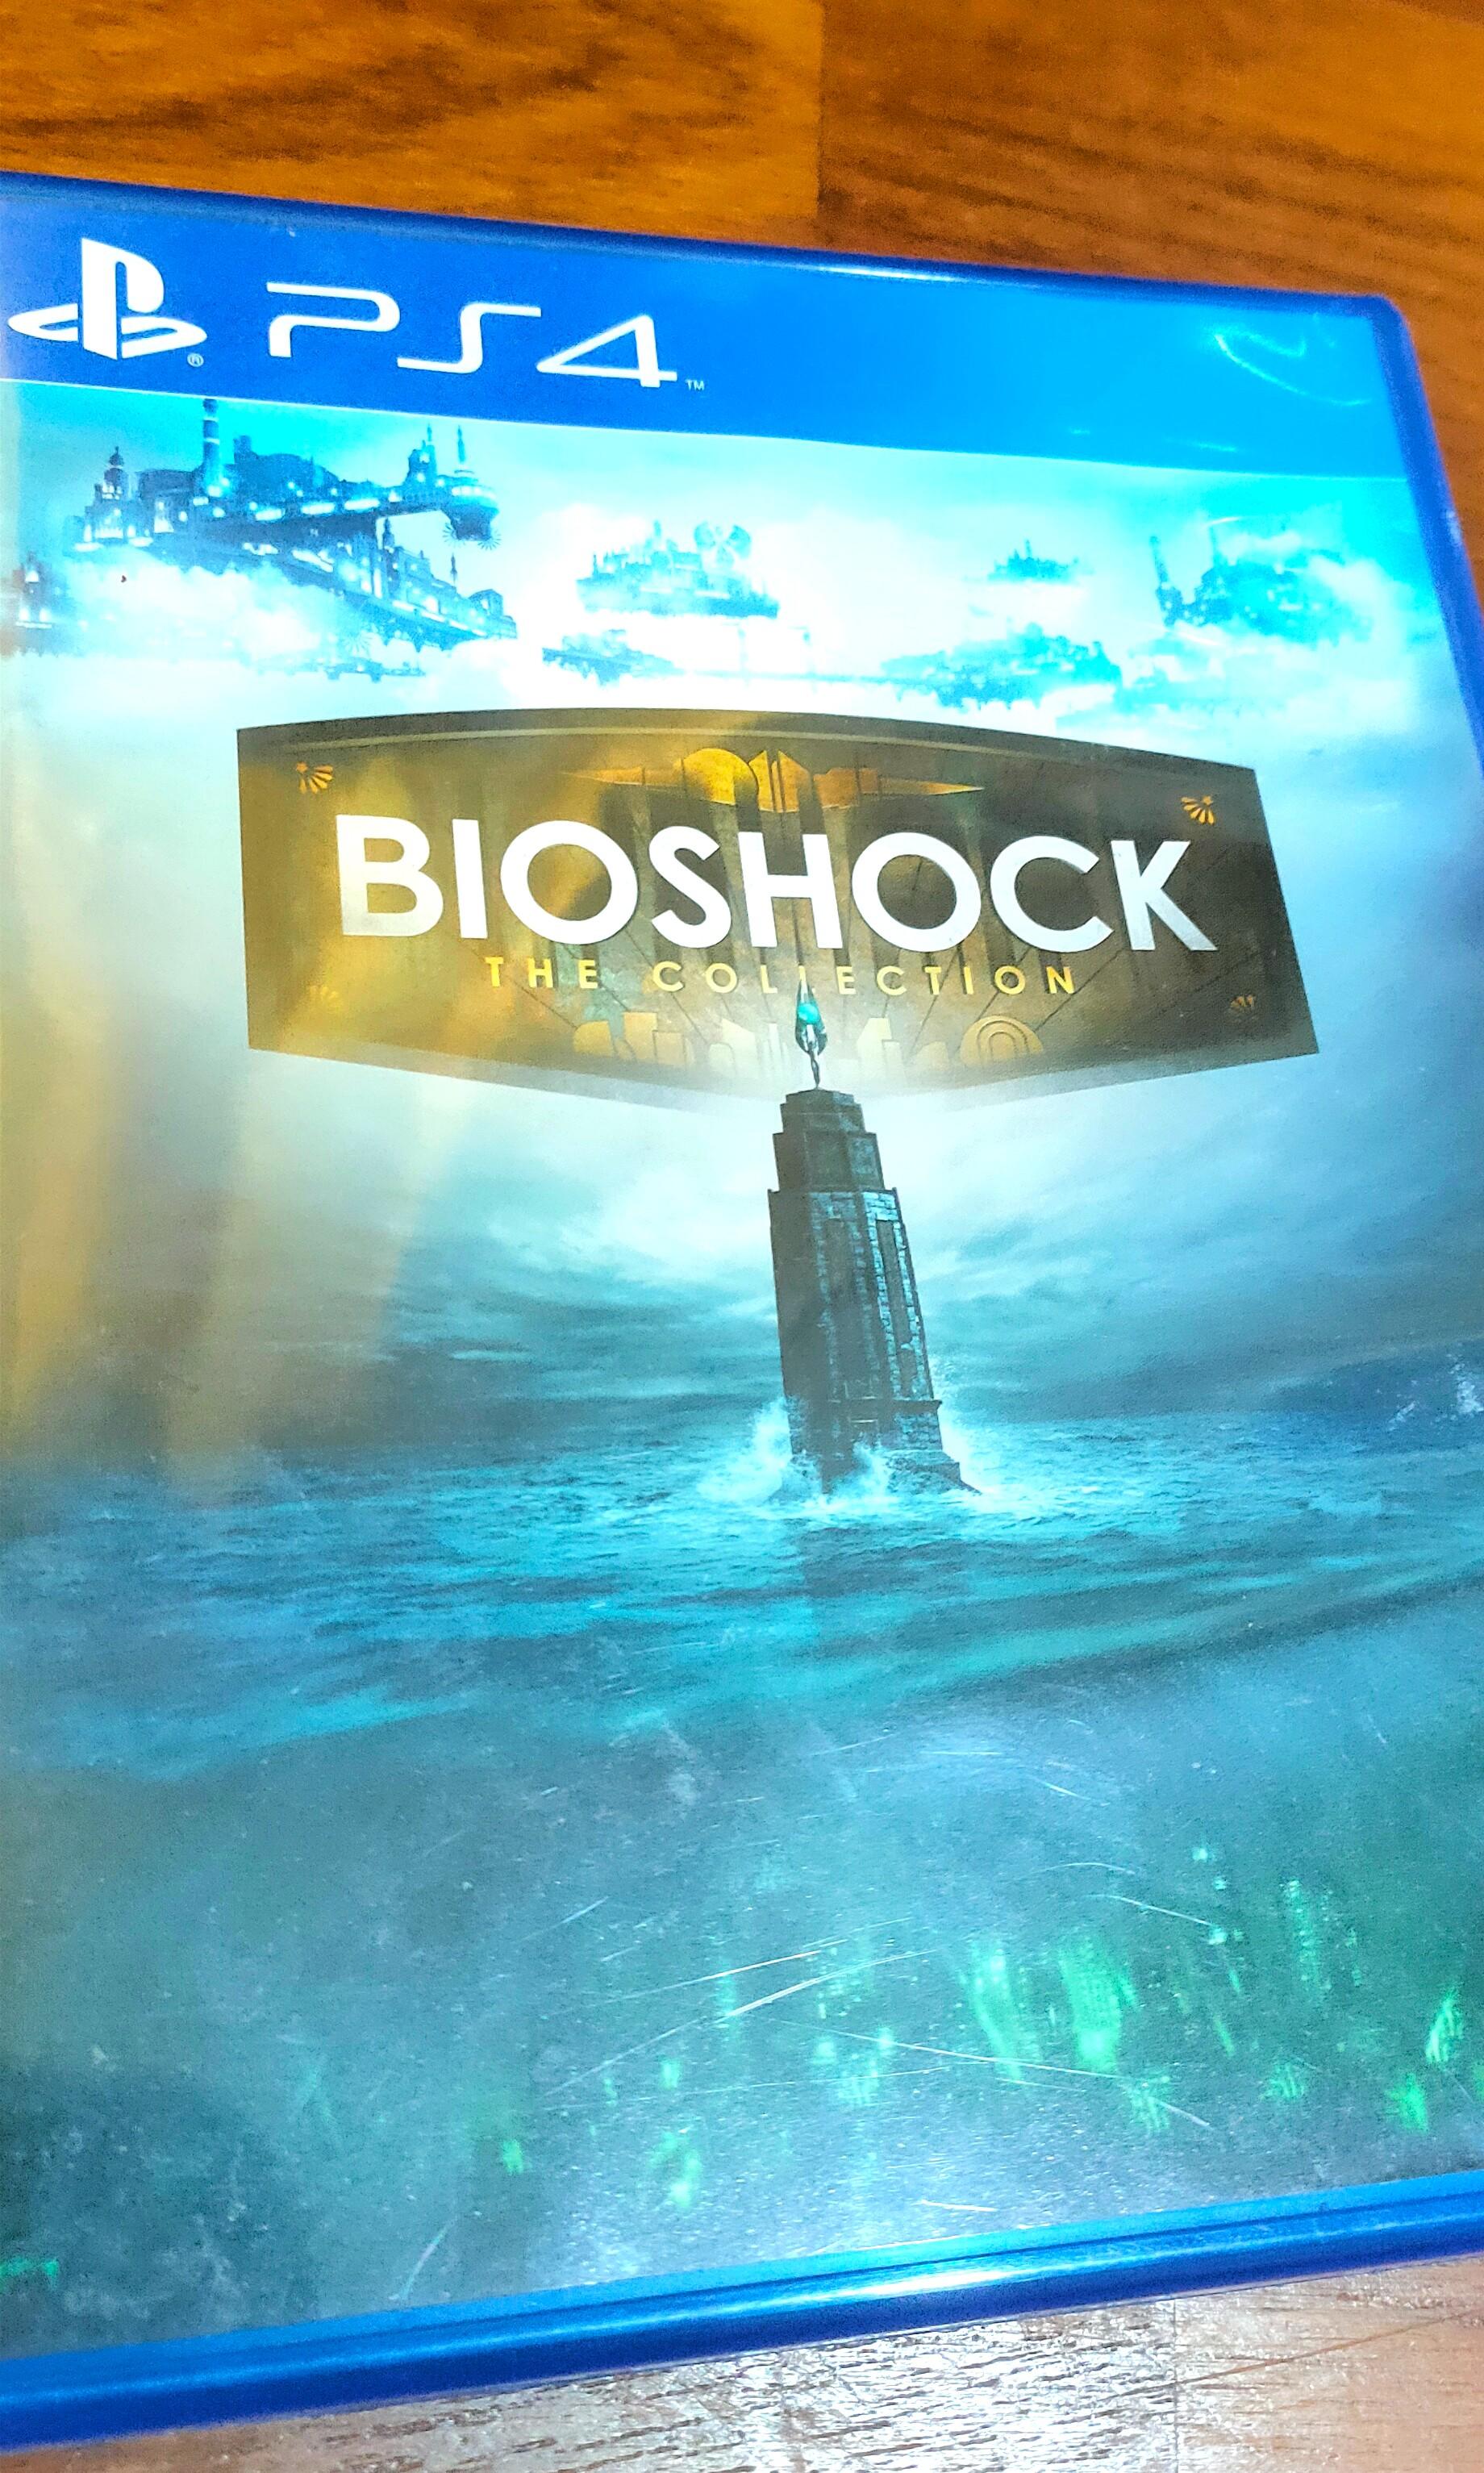 BIOSHOCK THE COLLECTION PS4 (US IMPORT) GAME for sale online